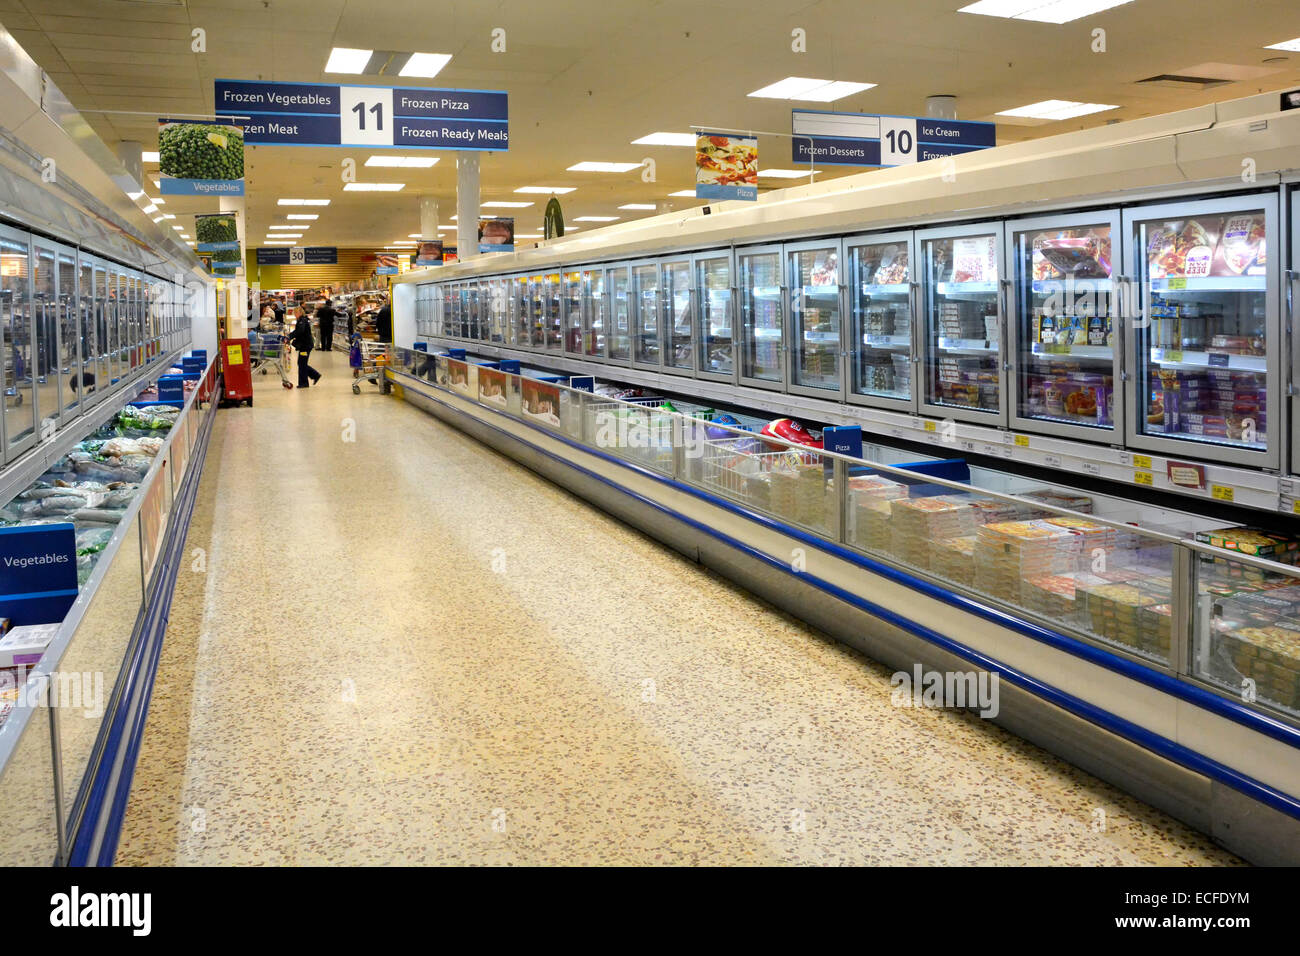 Shoppers & interior view Tesco supermarket frozen food aisle and cold cabinets shopping inside with terrazzo floor interior East London England UK Stock Photo